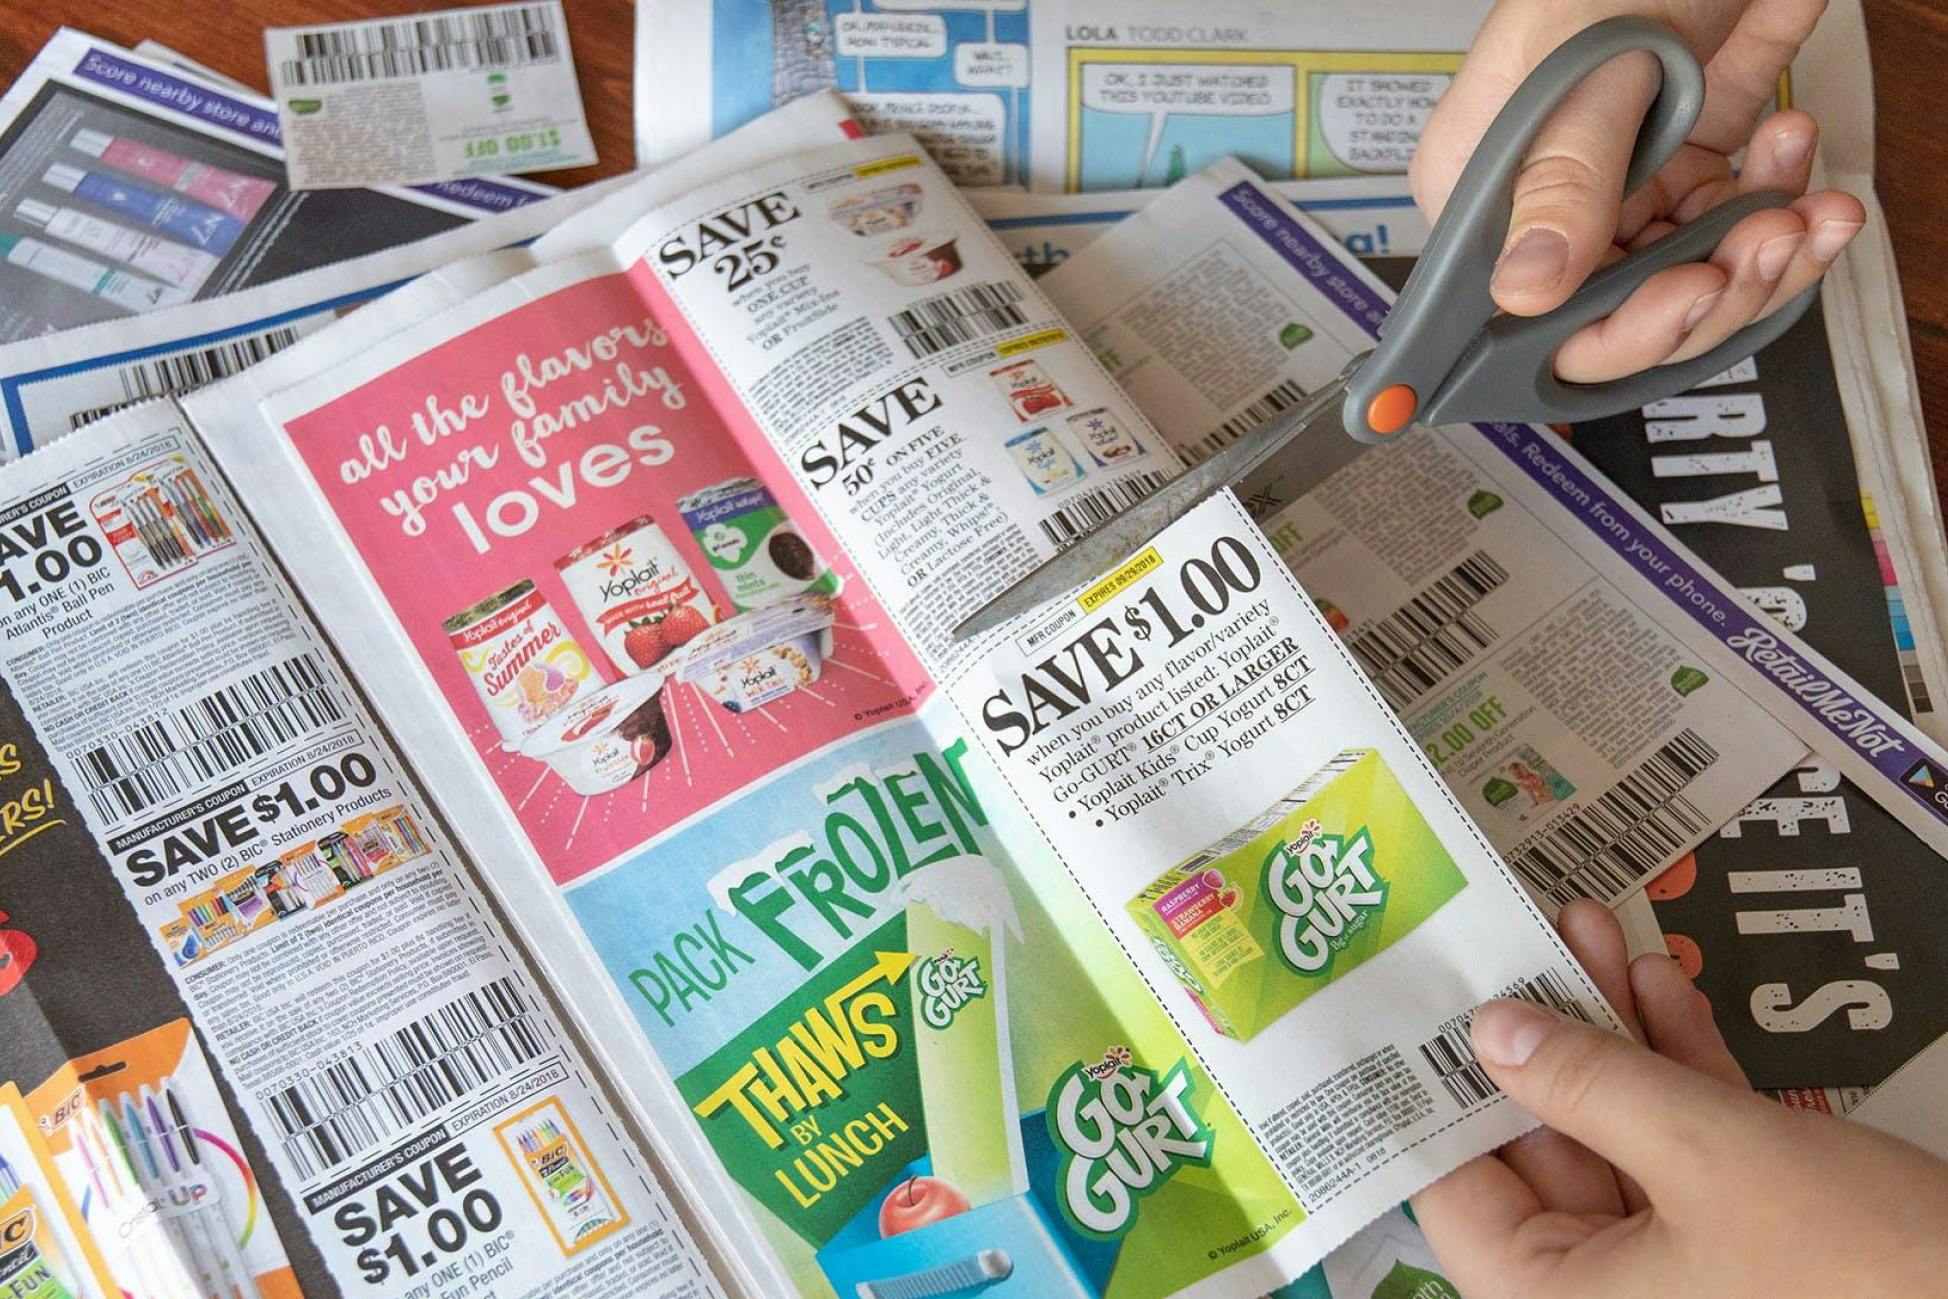 hands with scissors cutting out Go-GURT coupon from newspaper